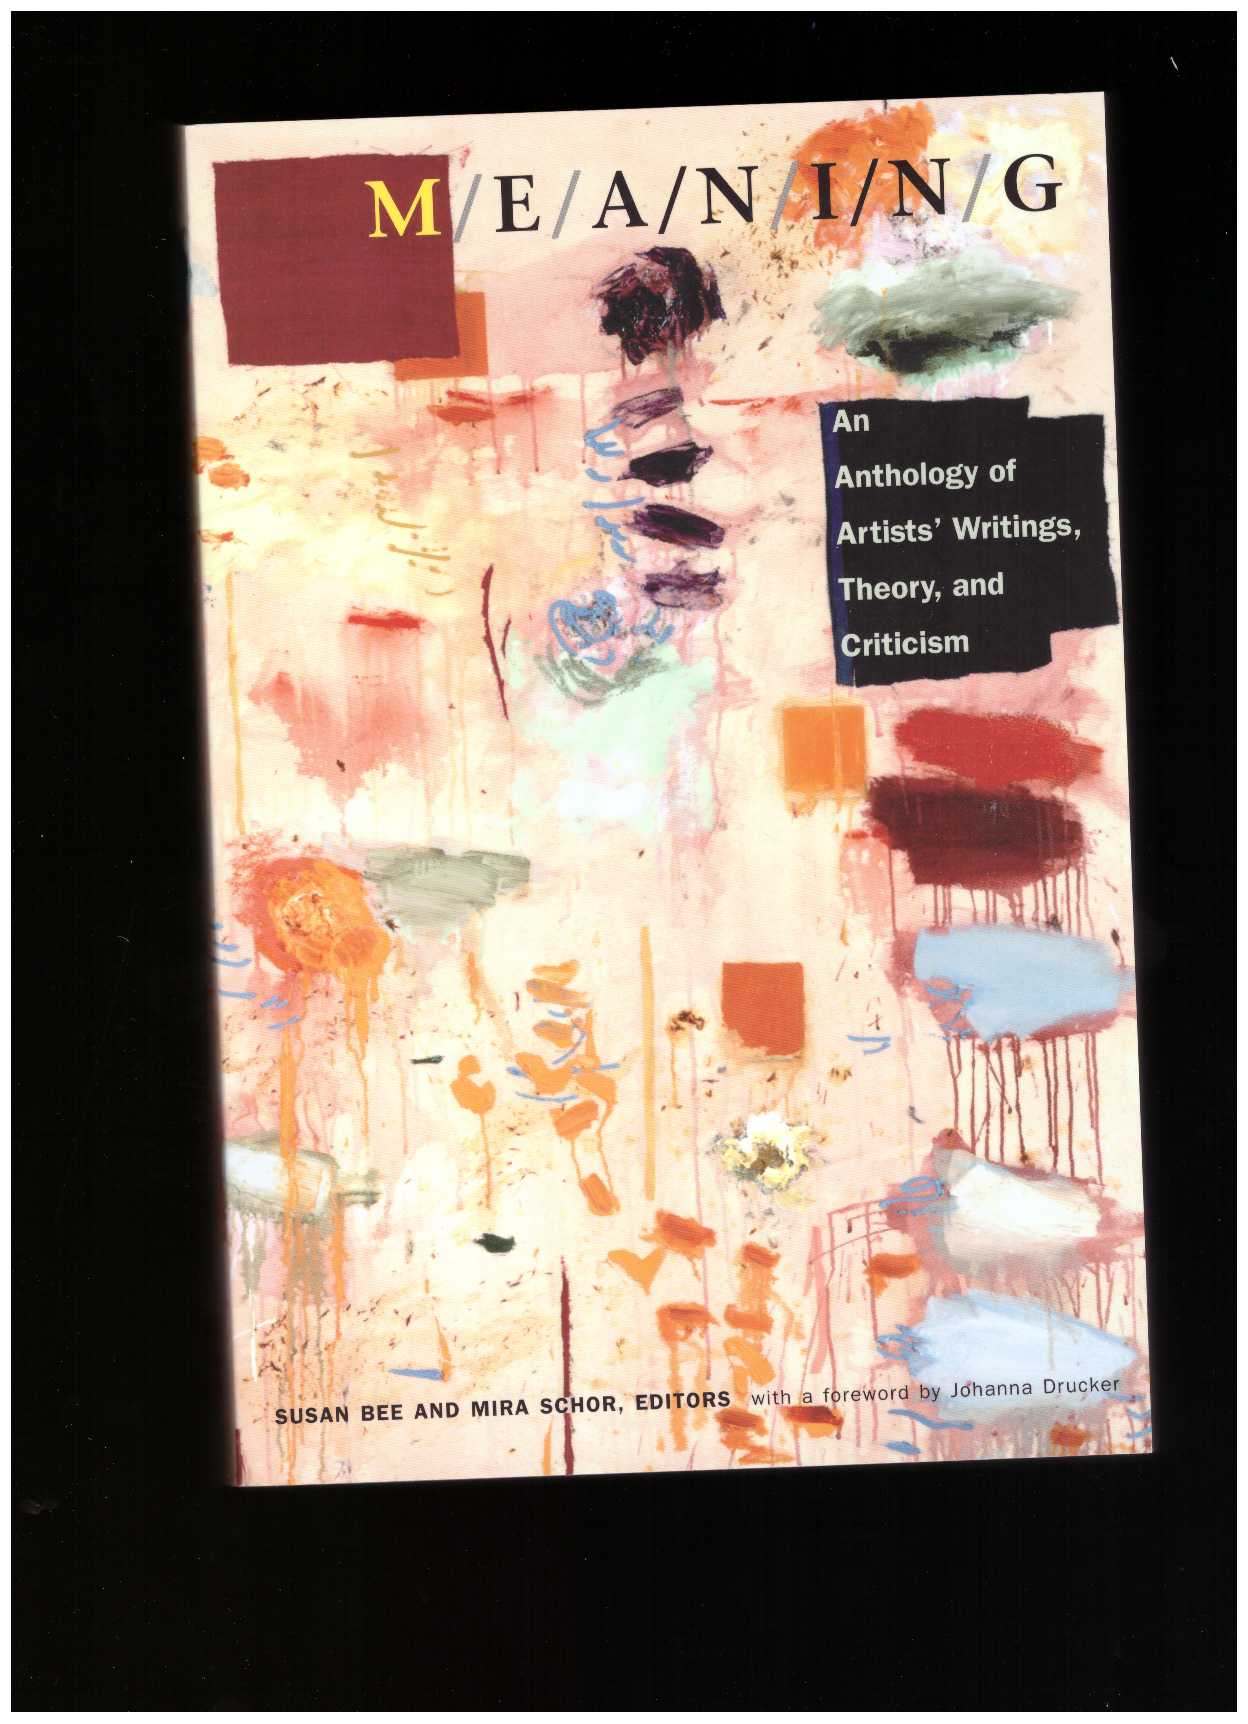 SCHOR, Mira; BEE, Susan (eds.) - M/E/A/N/I/N/G: An Anthology of Artists’ Writings, Theory, and Criticism